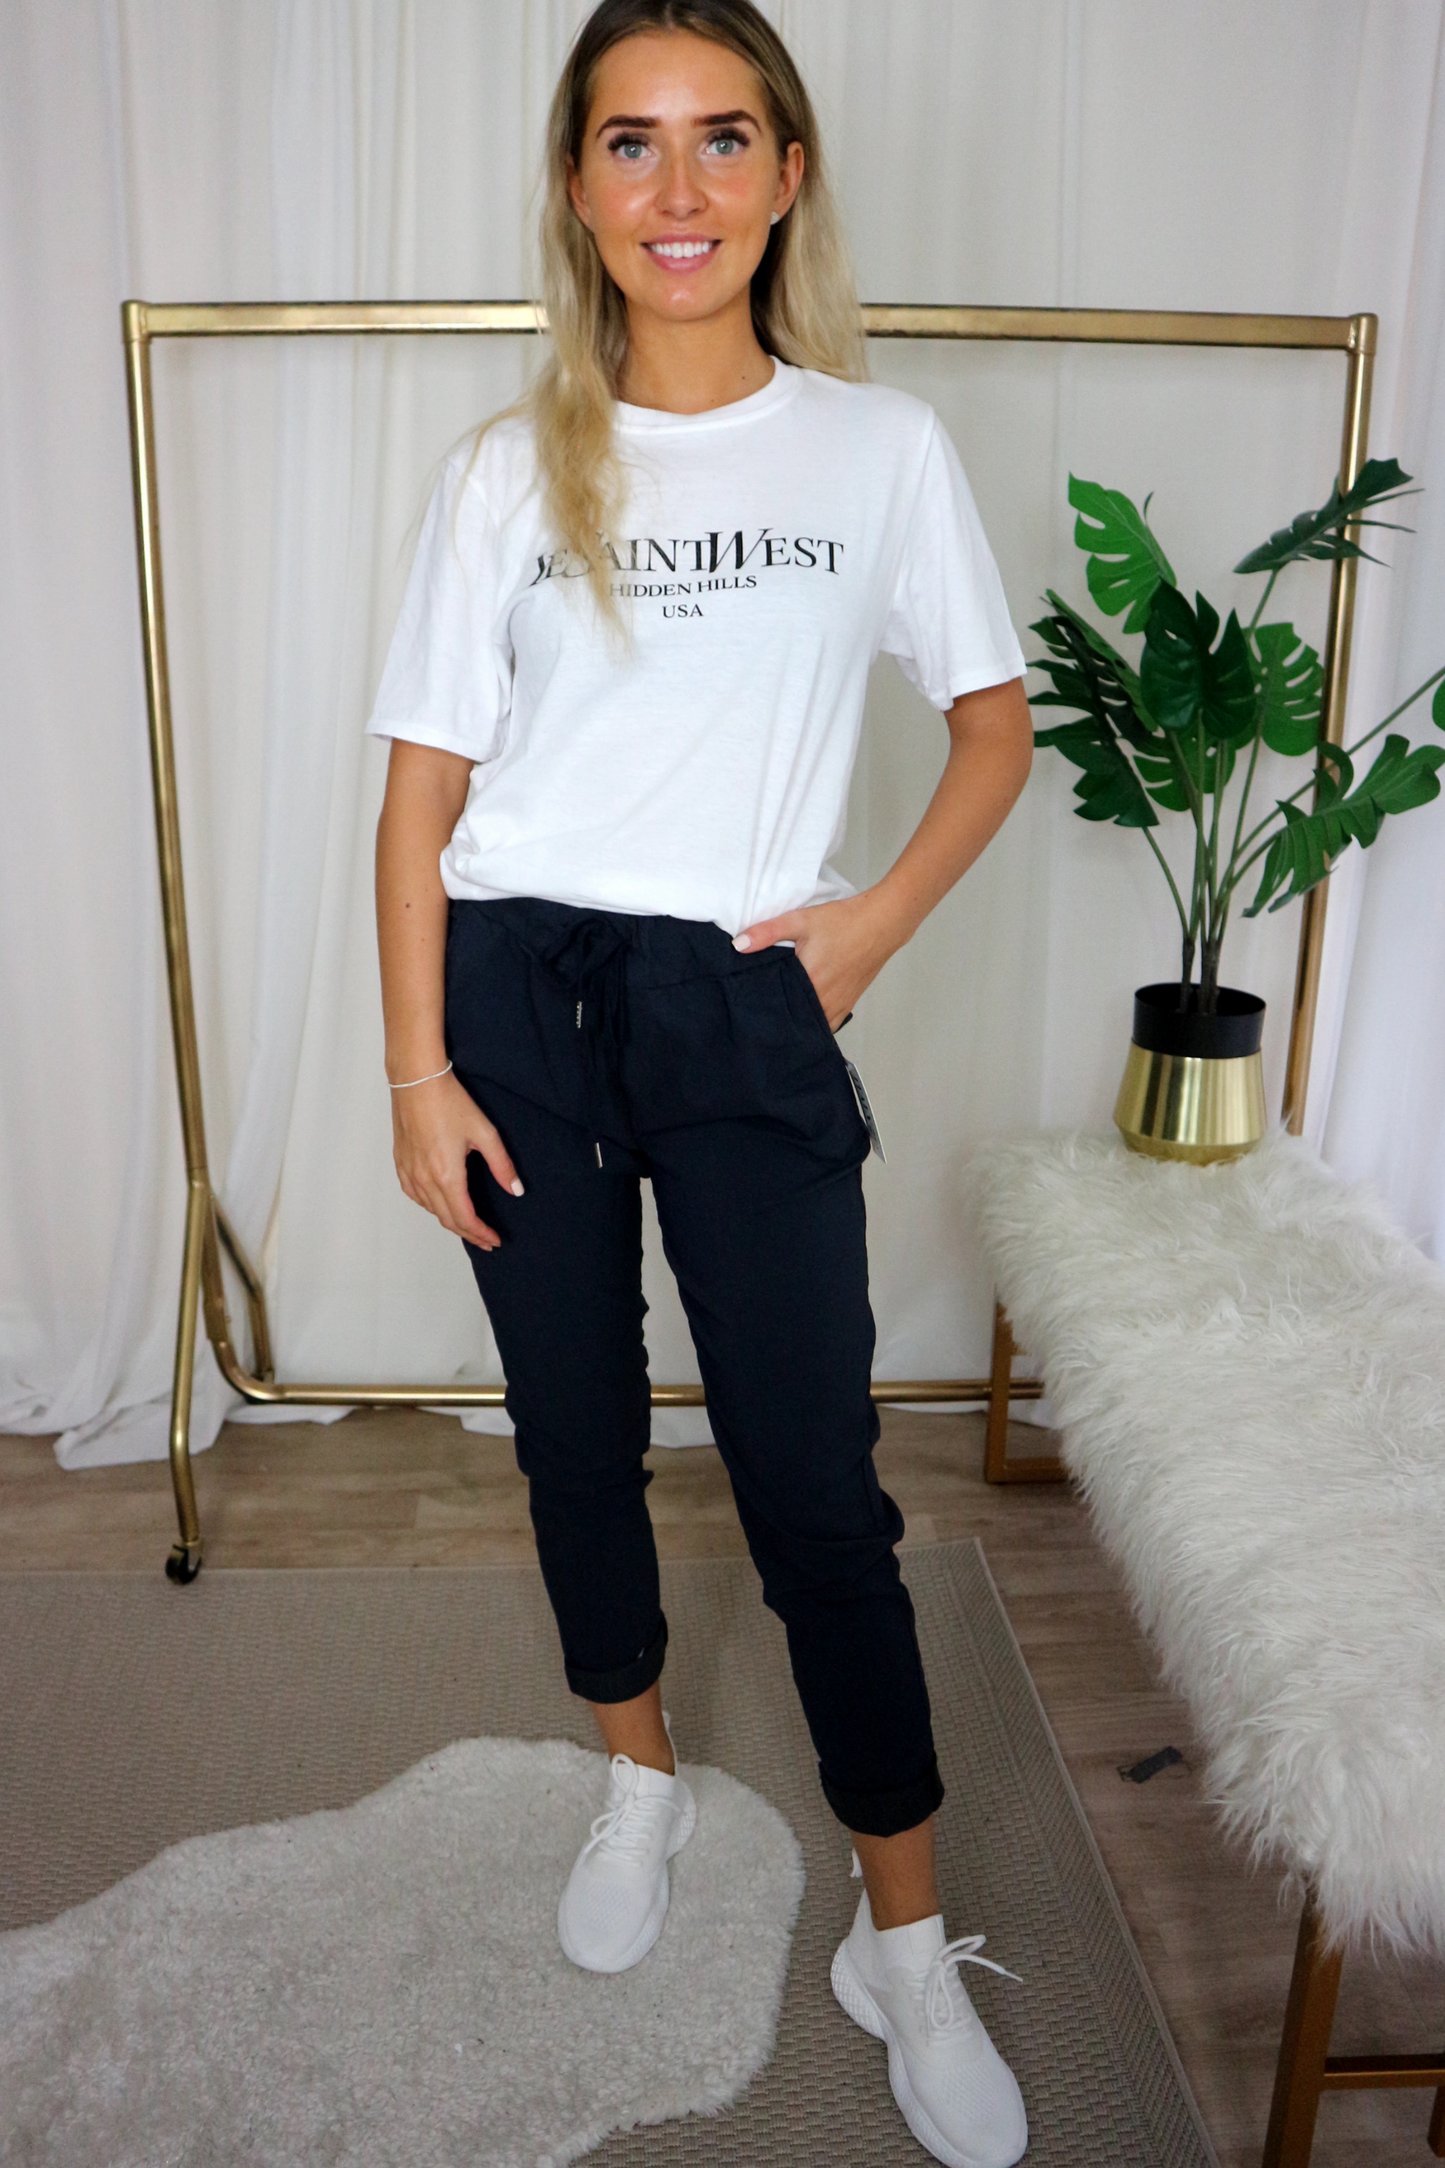 Navy Stretchy Bestselling Pants